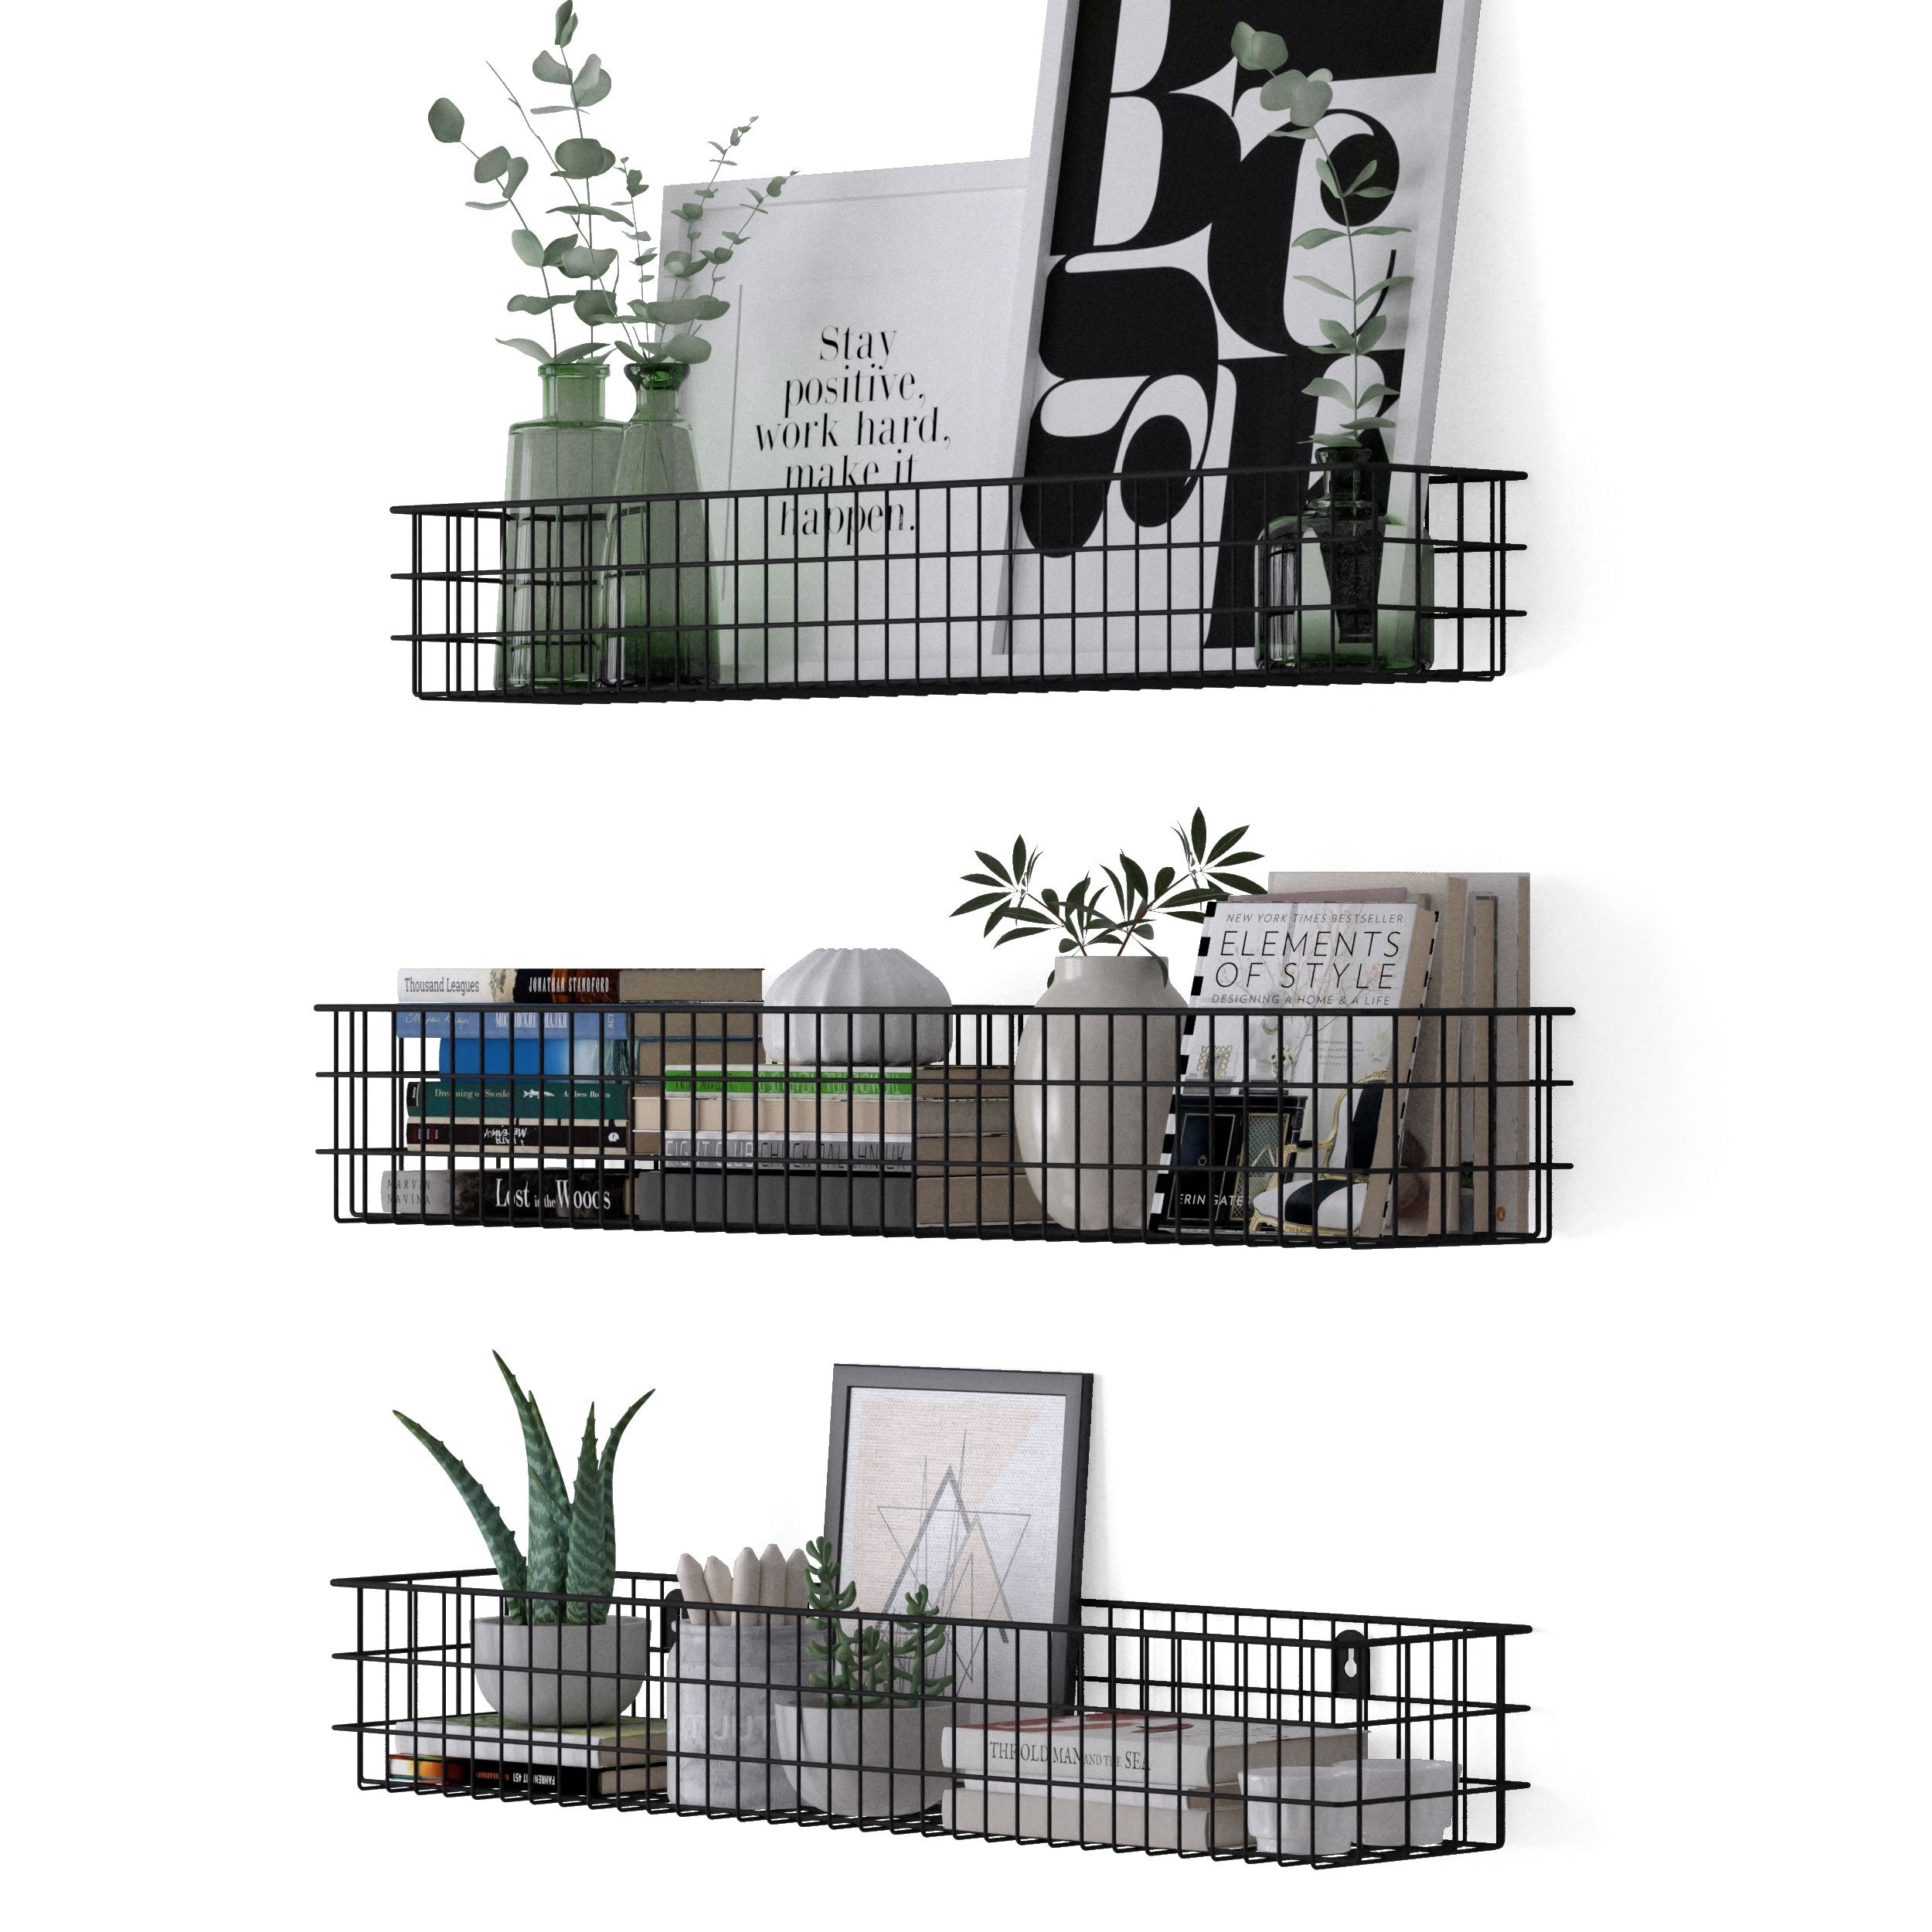 https://ak1.ostkcdn.com/images/products/is/images/direct/53c456609801ea7d004ddc80bea30508dce2872e/Wall35-Kansas-Black-Wall-Hanging-Baskets-Multi-Size-Bedroom-Storage-Bins-Metal-%28Set-of-3%29.jpg